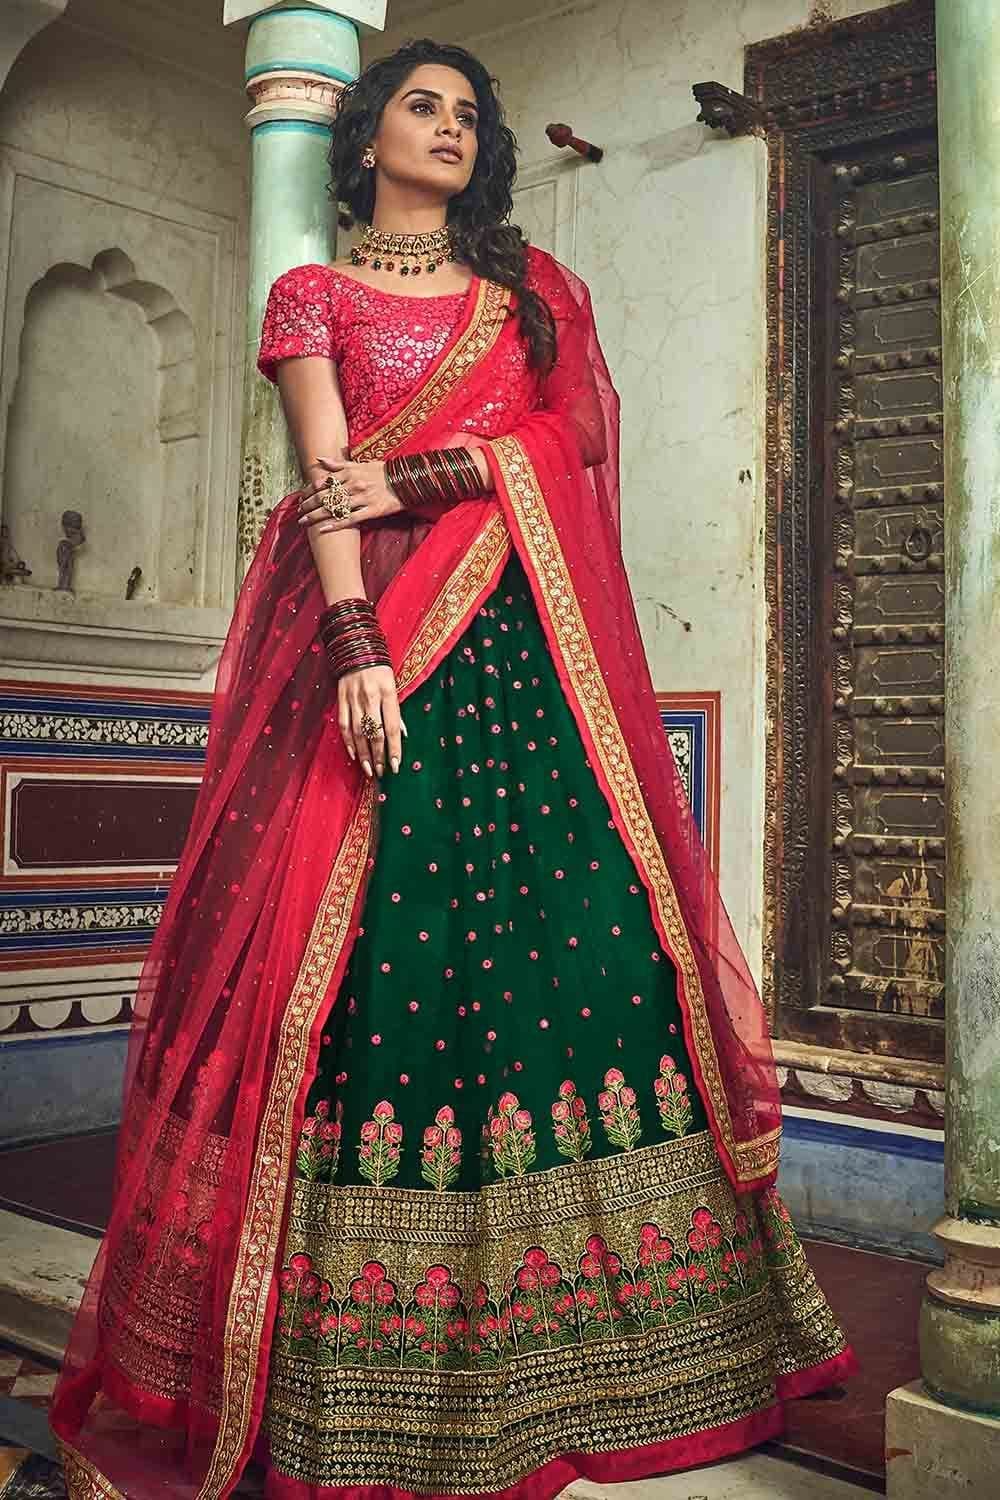 Bottle-Green with Beautiful Floral Print Lehenga Choli With Heavy Sequins  Work Red Dupatta | Exotic India Art